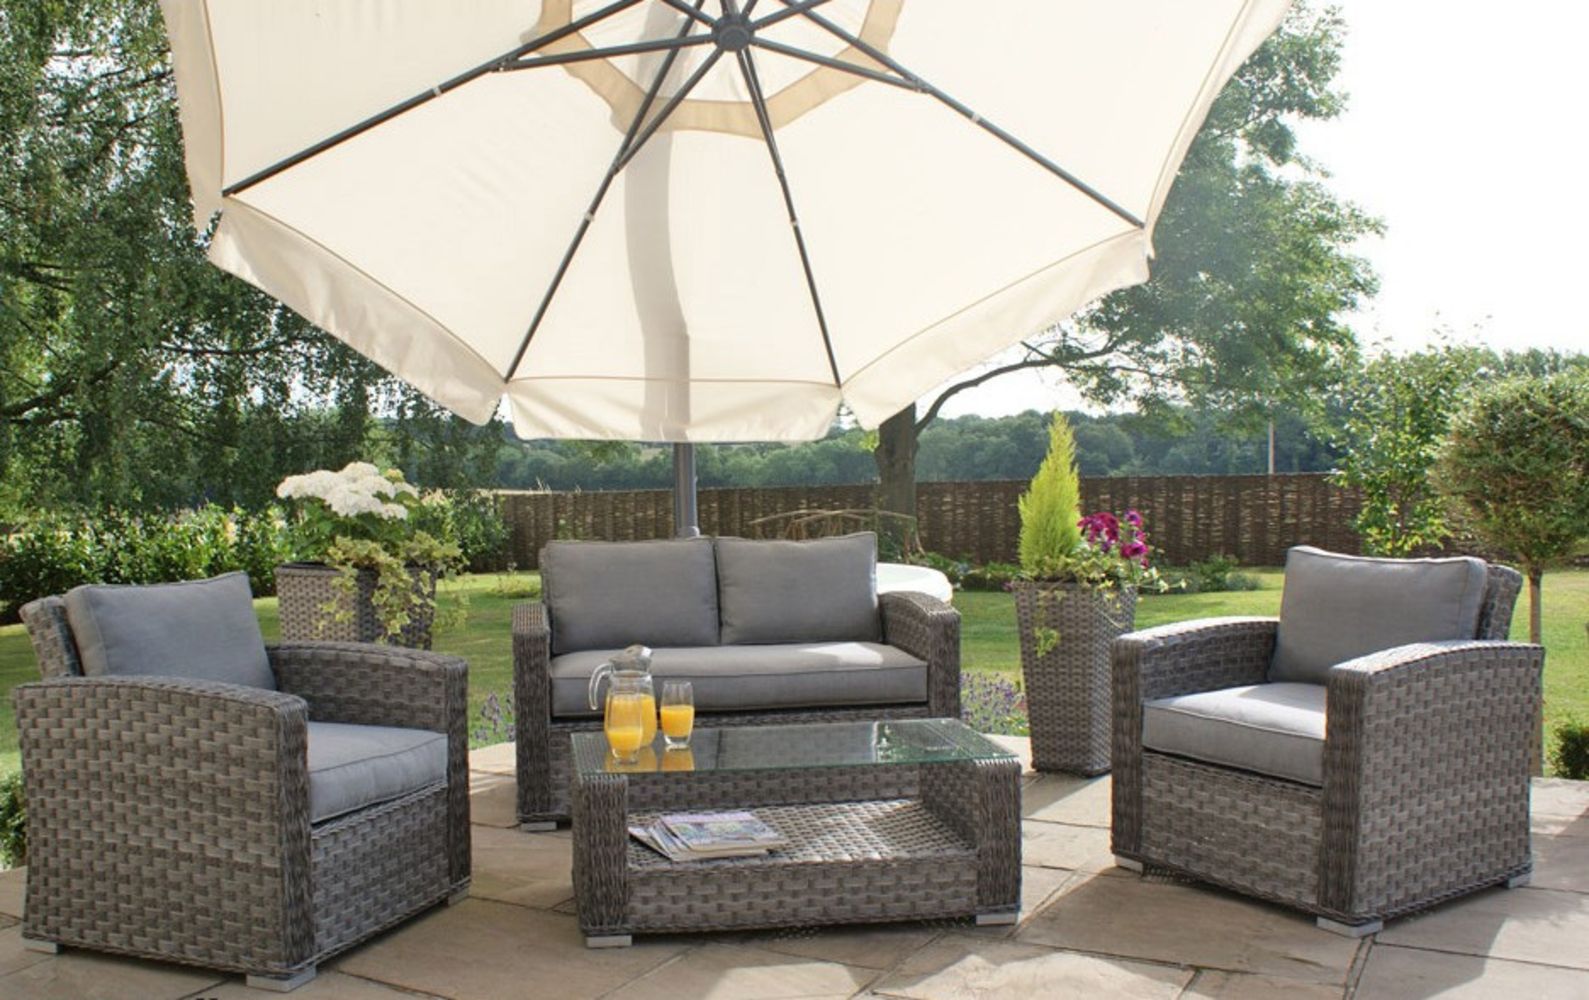 Brand New Exclusive Range Of Rattan Garden Furniture Inc Dining Sets, Sun Beds, Coffee Tables - More Coming Soon